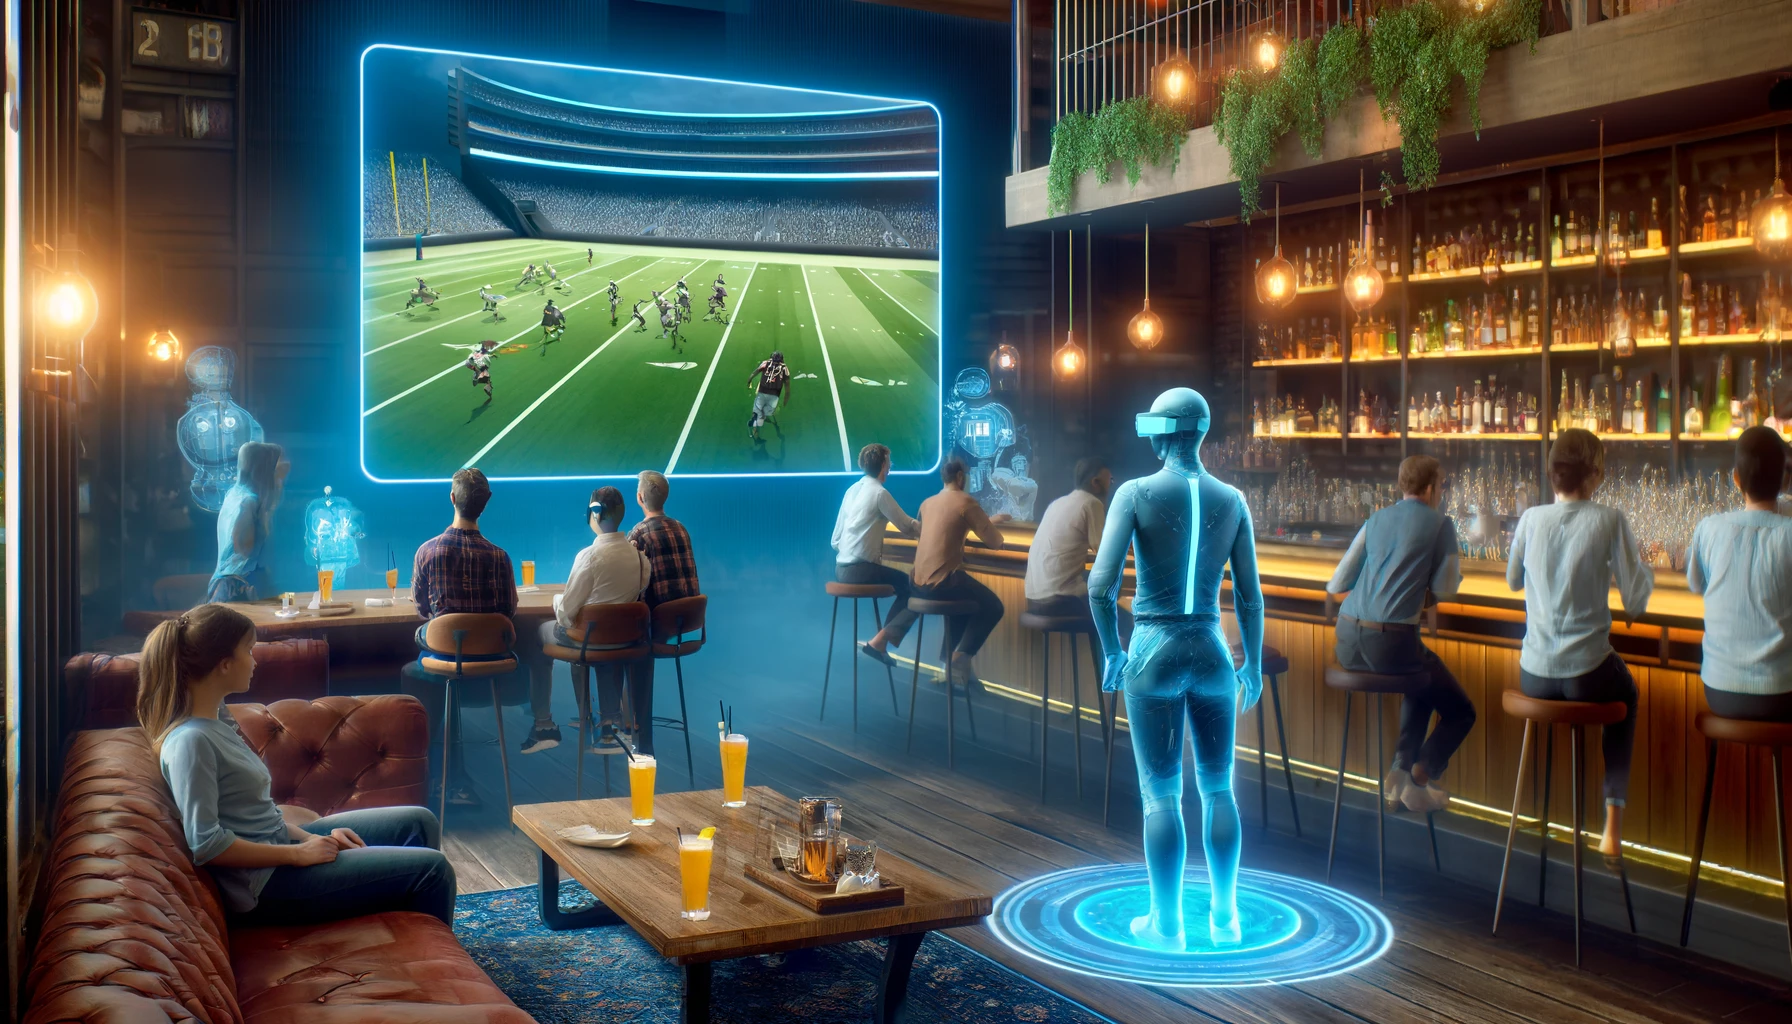 Modern bar with comfortable seating and stylish decor. A large flat-screen TV displays a live sporting event. Patrons with AR glasses are engaged, and an AI bartender uses a holographic interface.